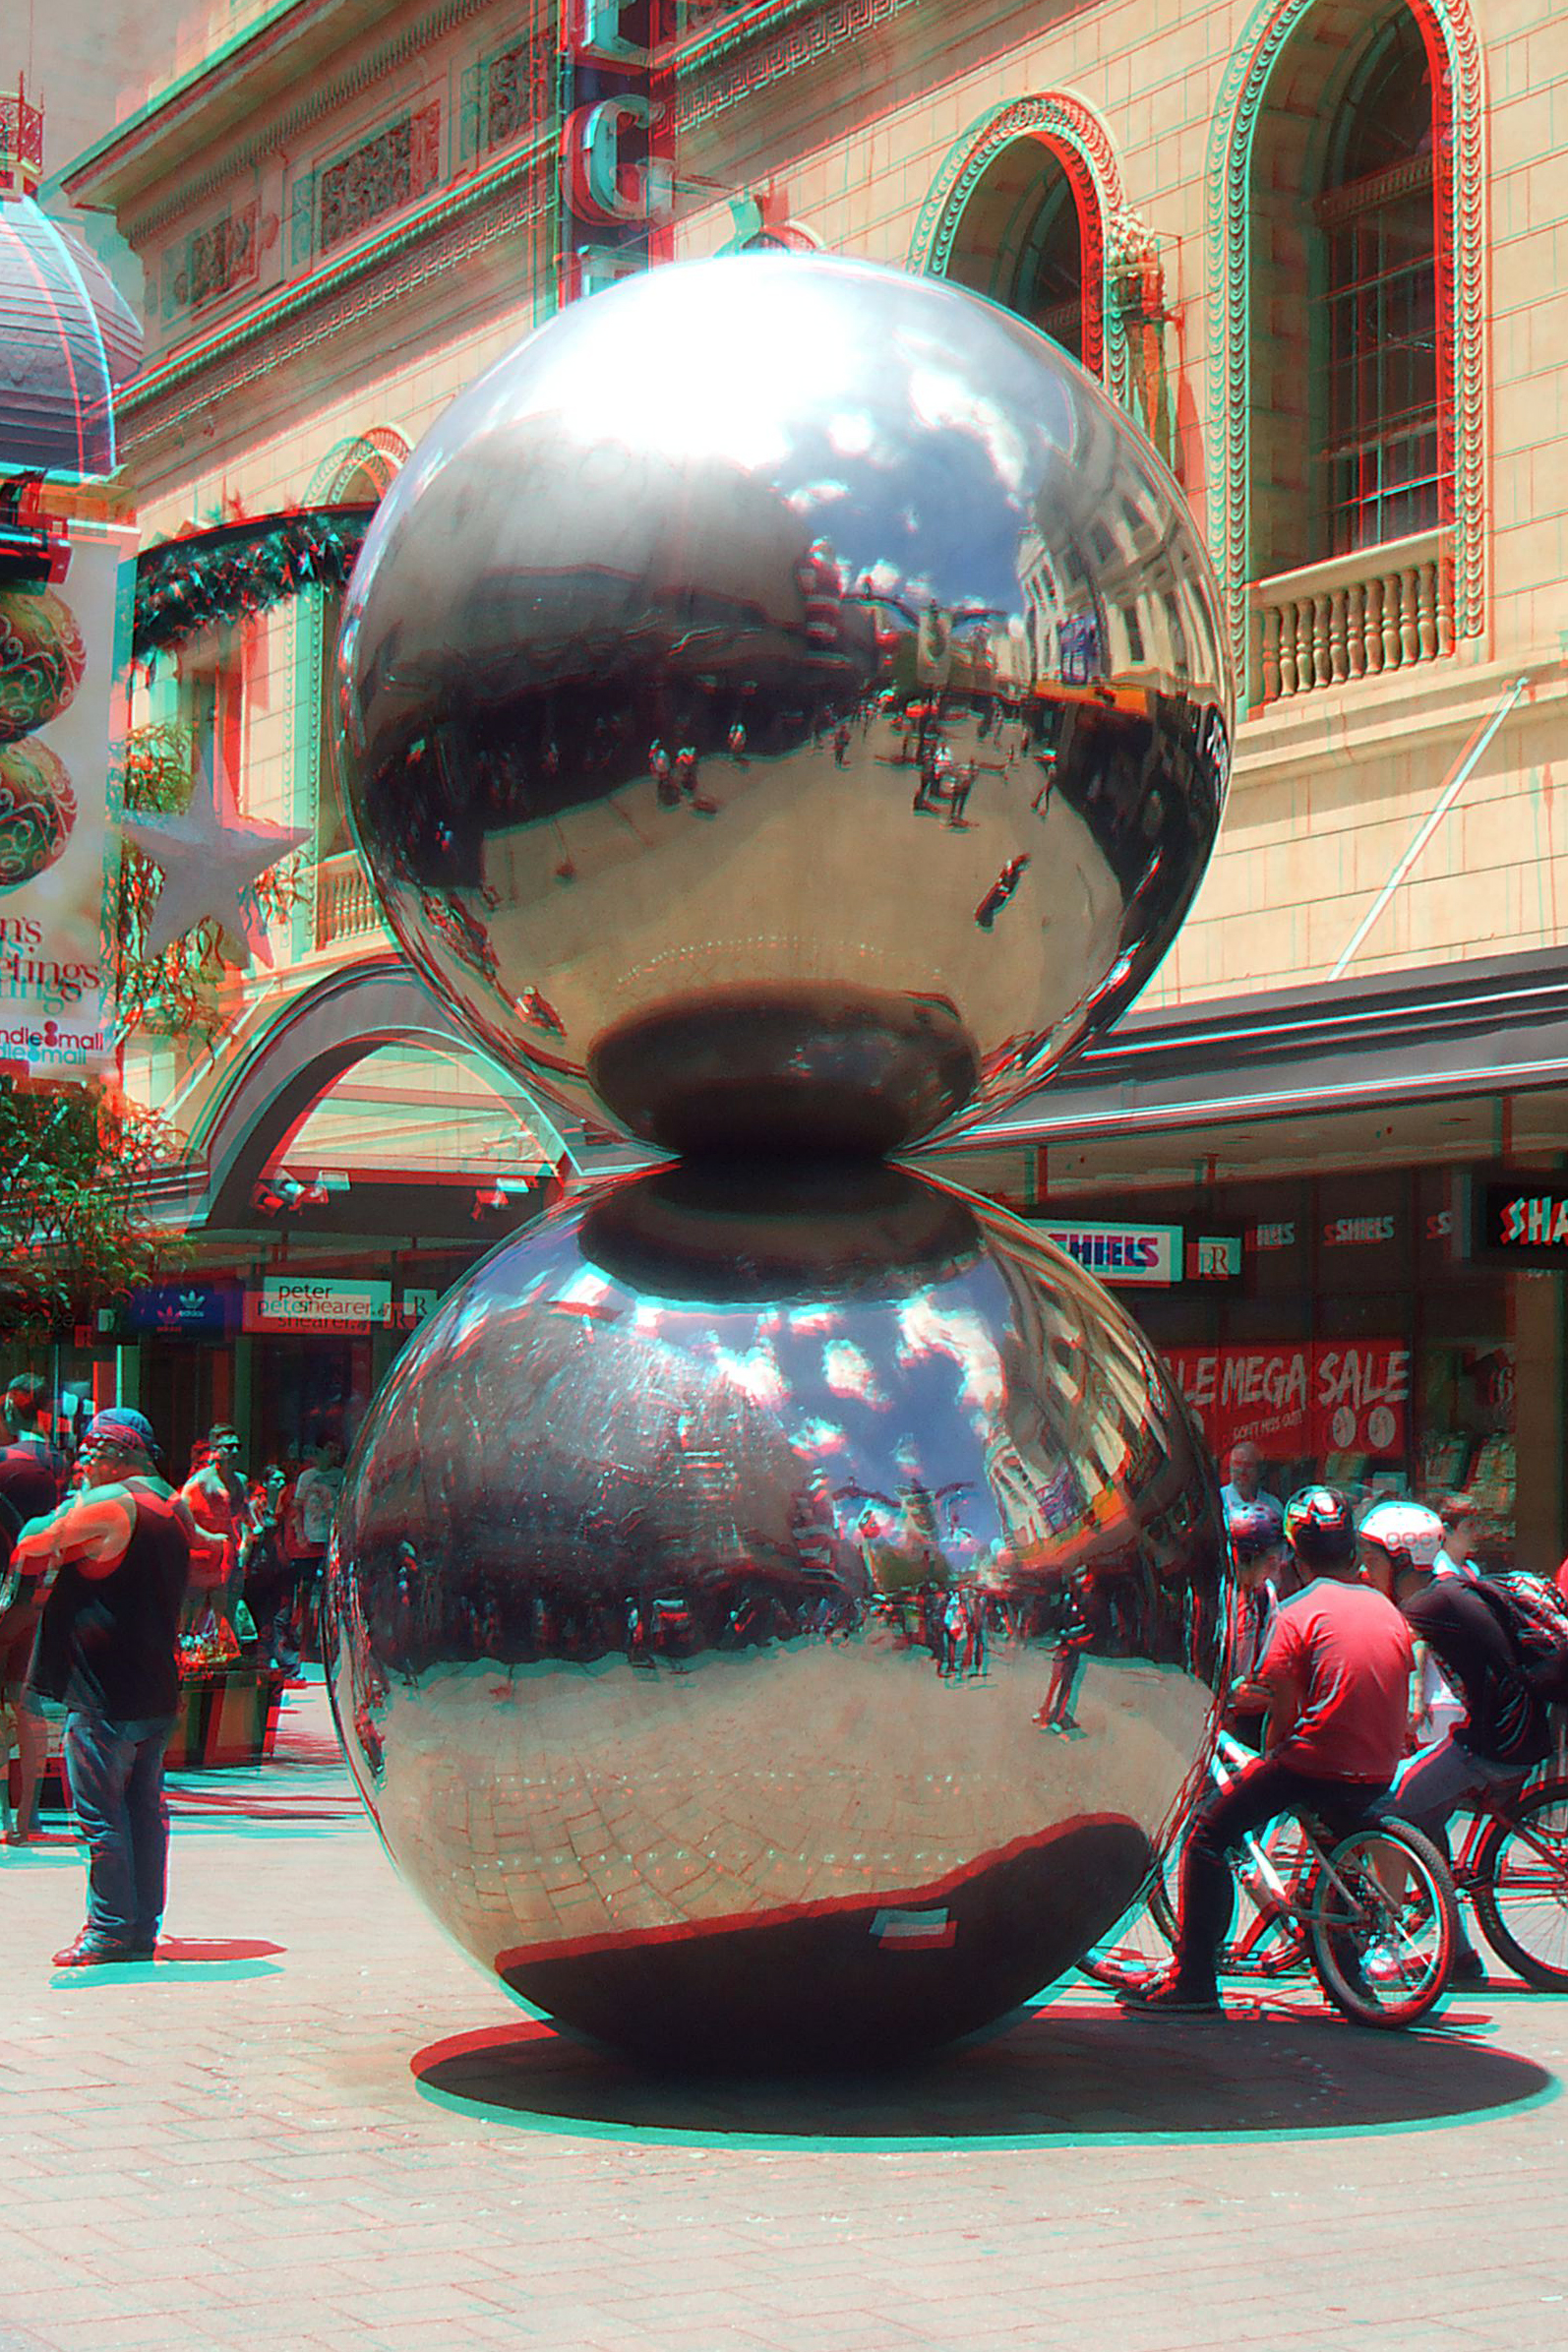 On Further Reflection in Rundle Mall anaglyph